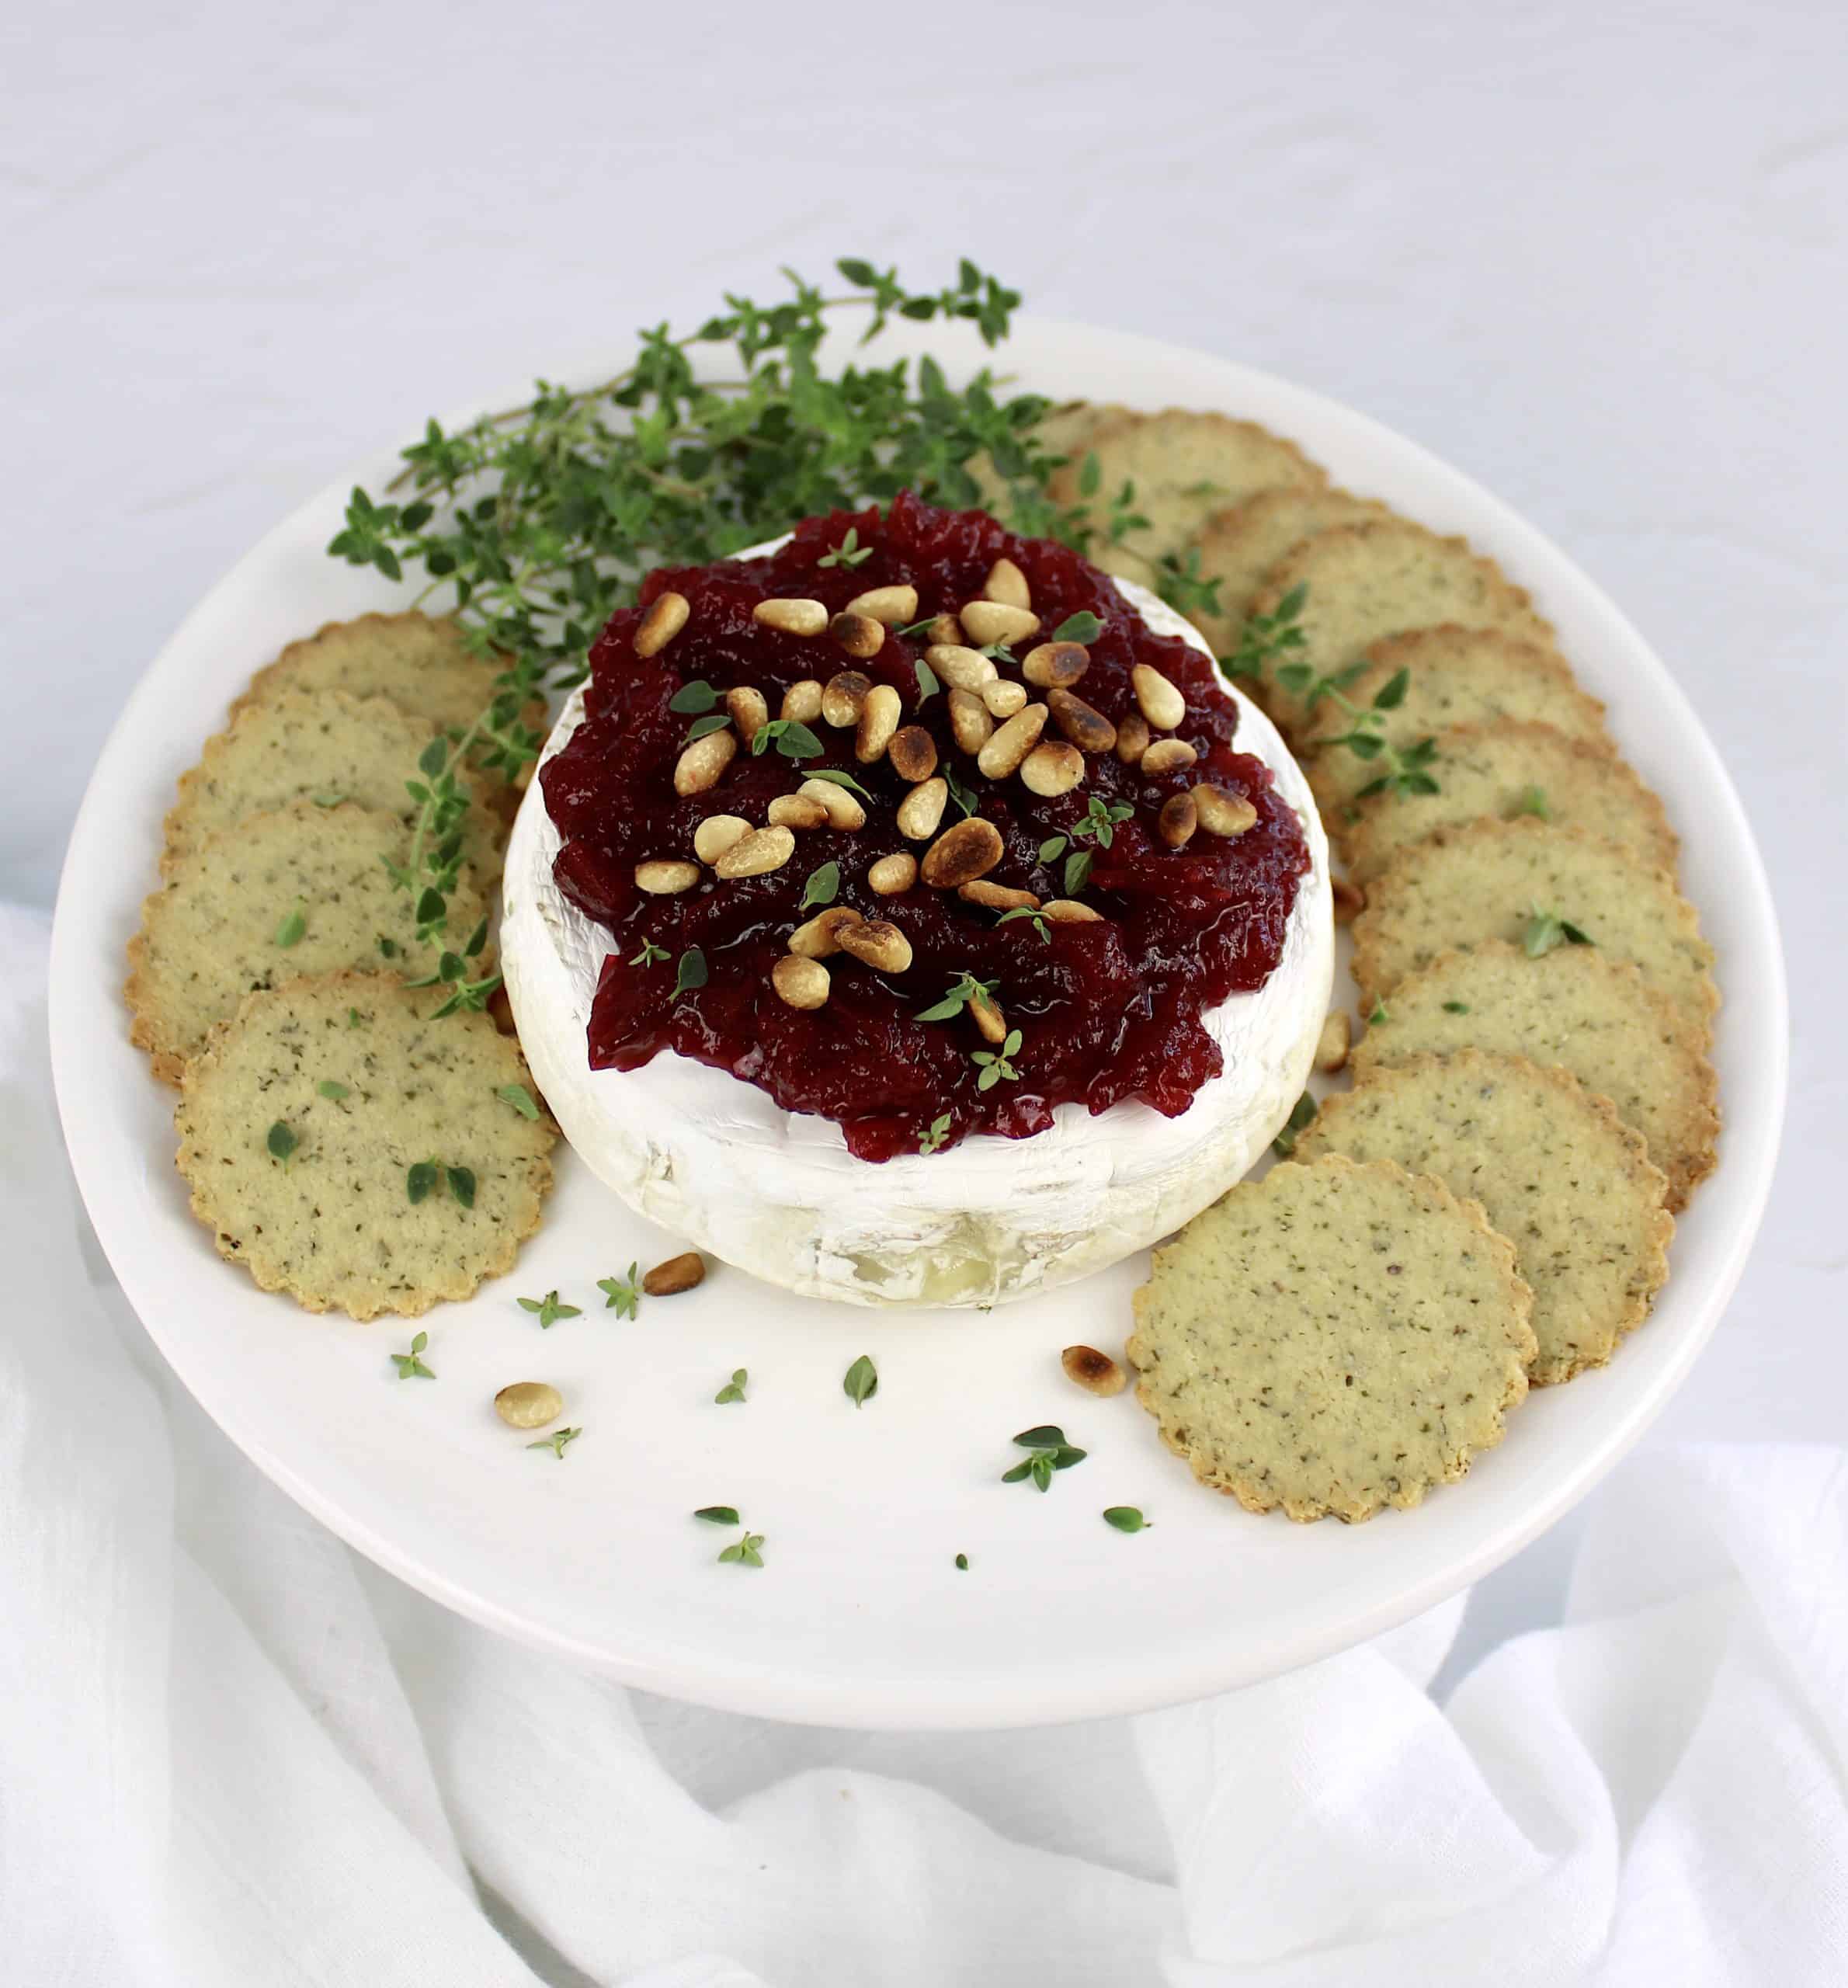 baked brie with cranberry sauce and pine nuts on top with crackers on the side